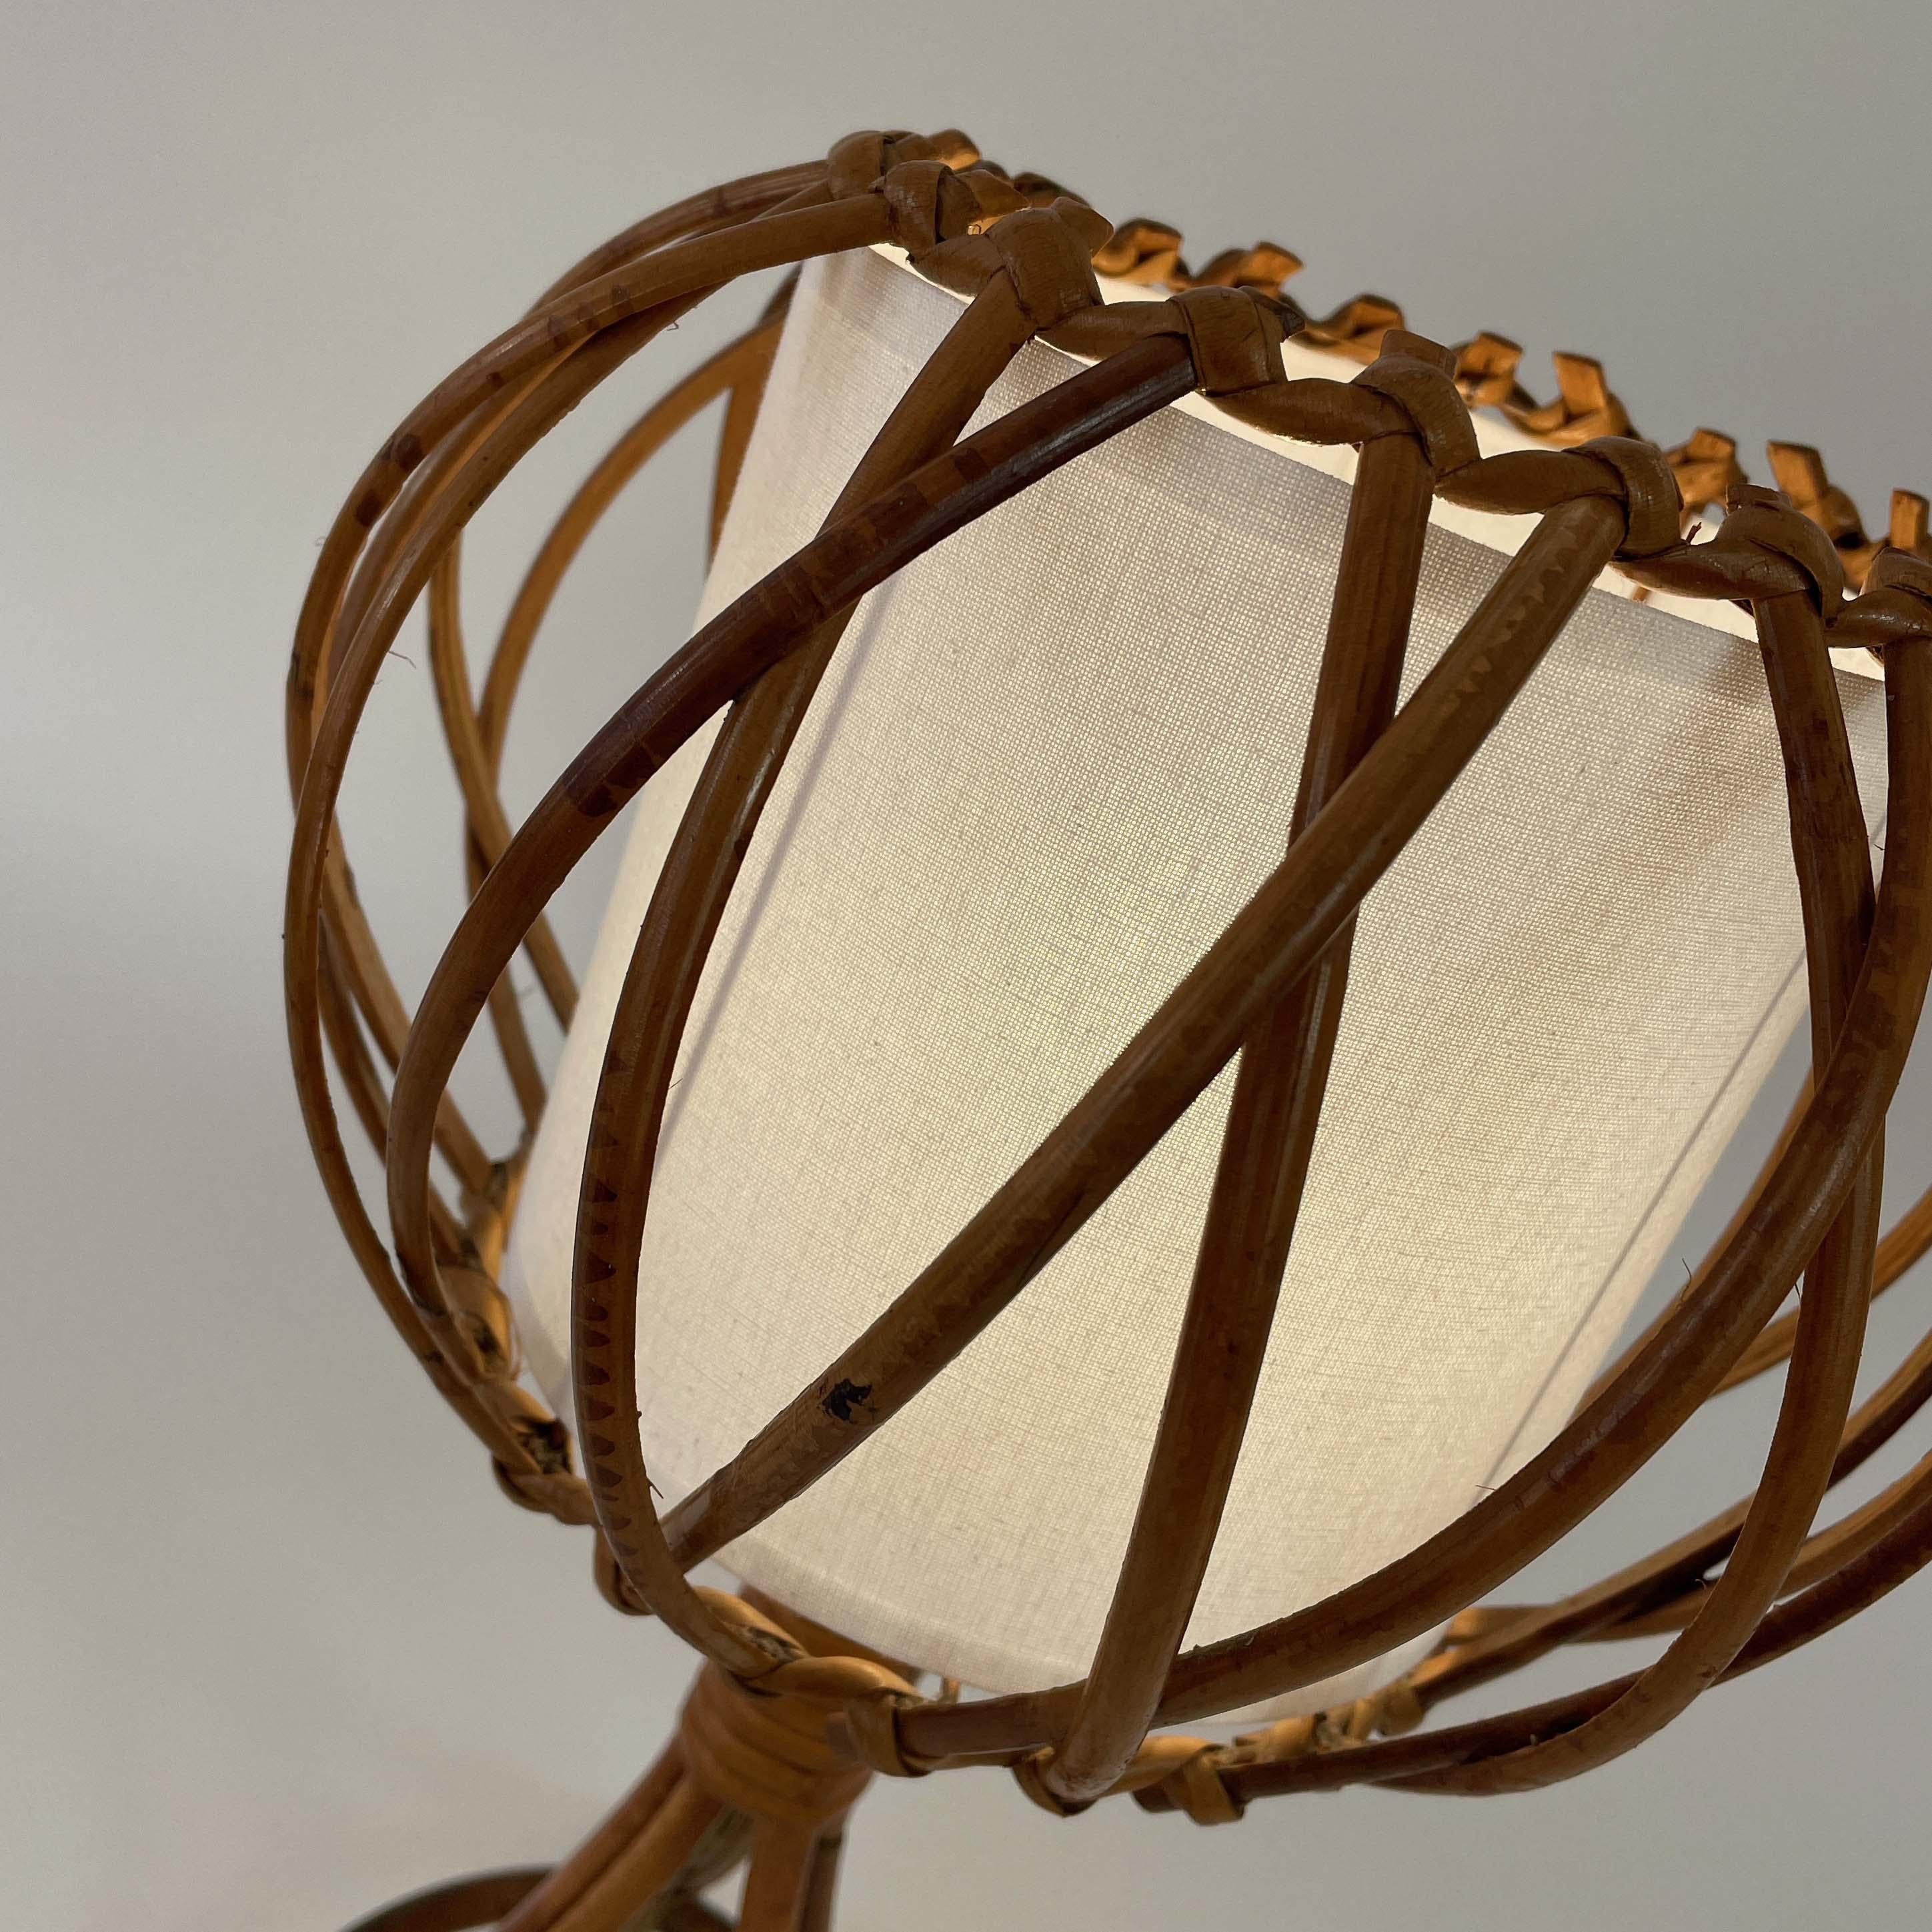 Rattan Bamboo & Fabric Table Lamp, Louis SOGNOT France 1950s For Sale 4